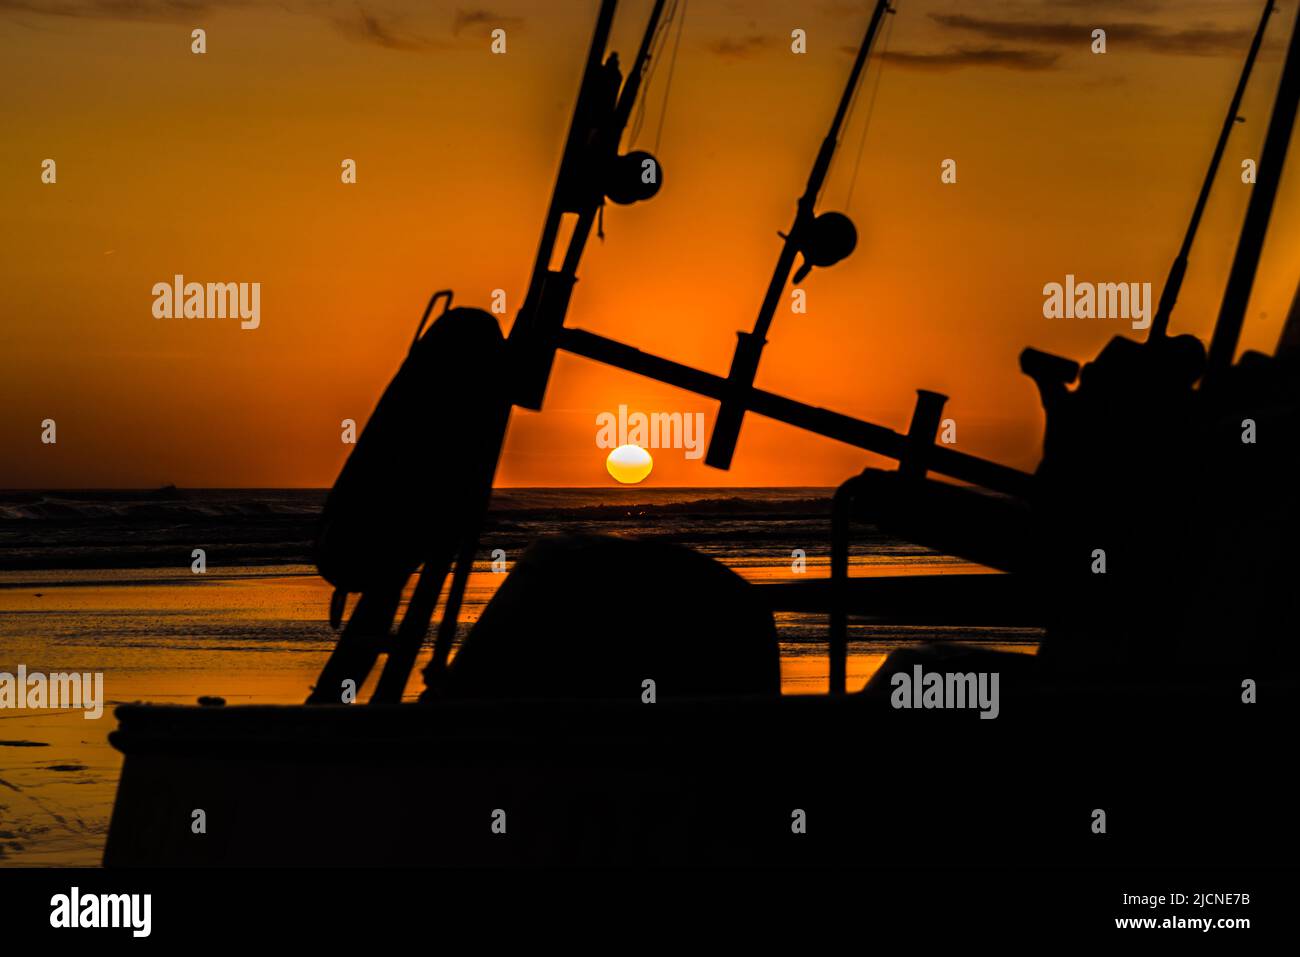 Silhouette of a fishing boat with fishing rods and reels with a golden sunset. Stock Photo